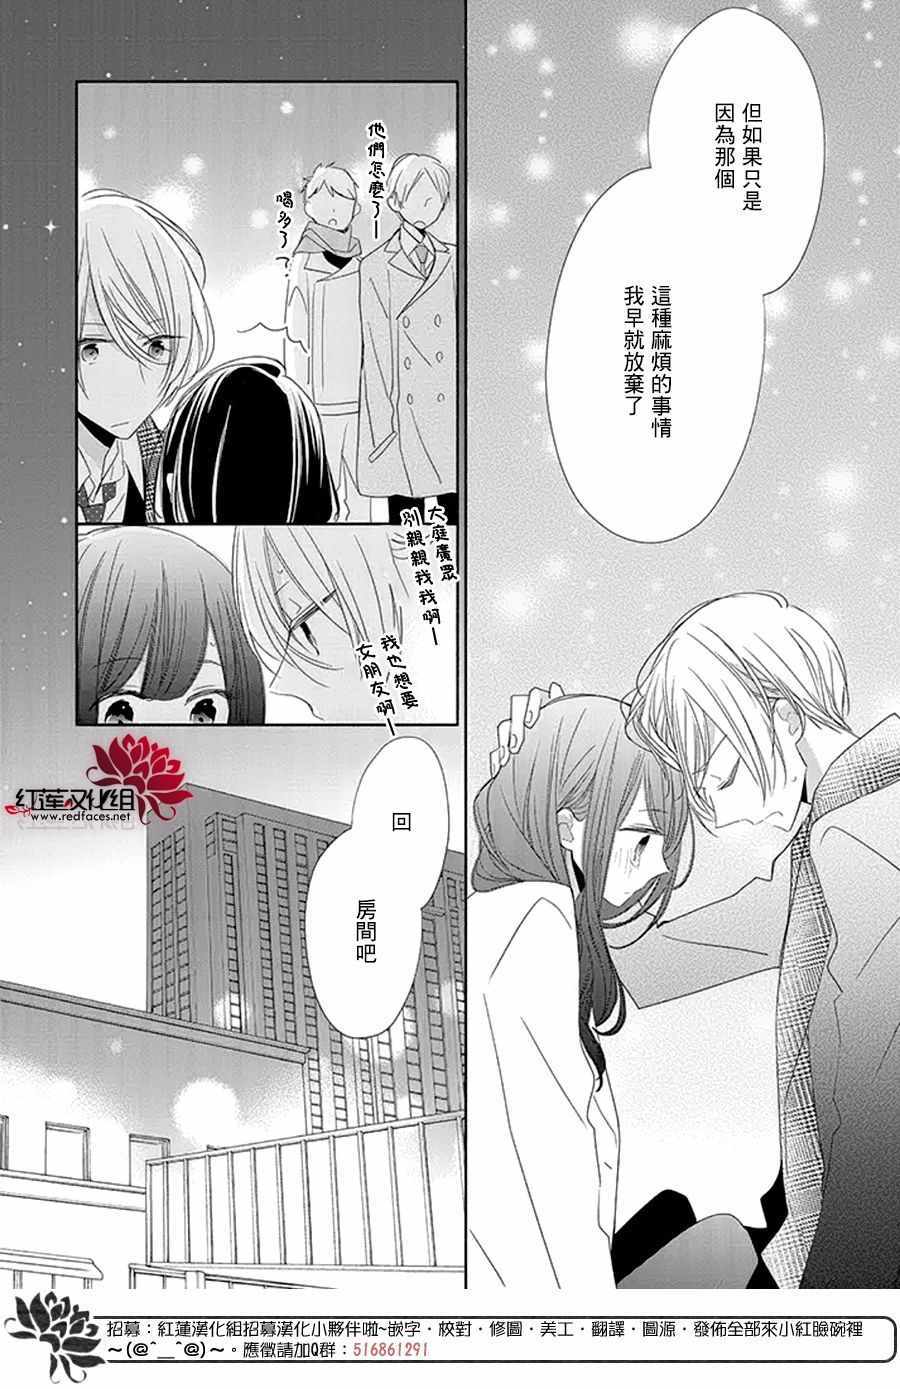 If given a second chance - 20話 - 2